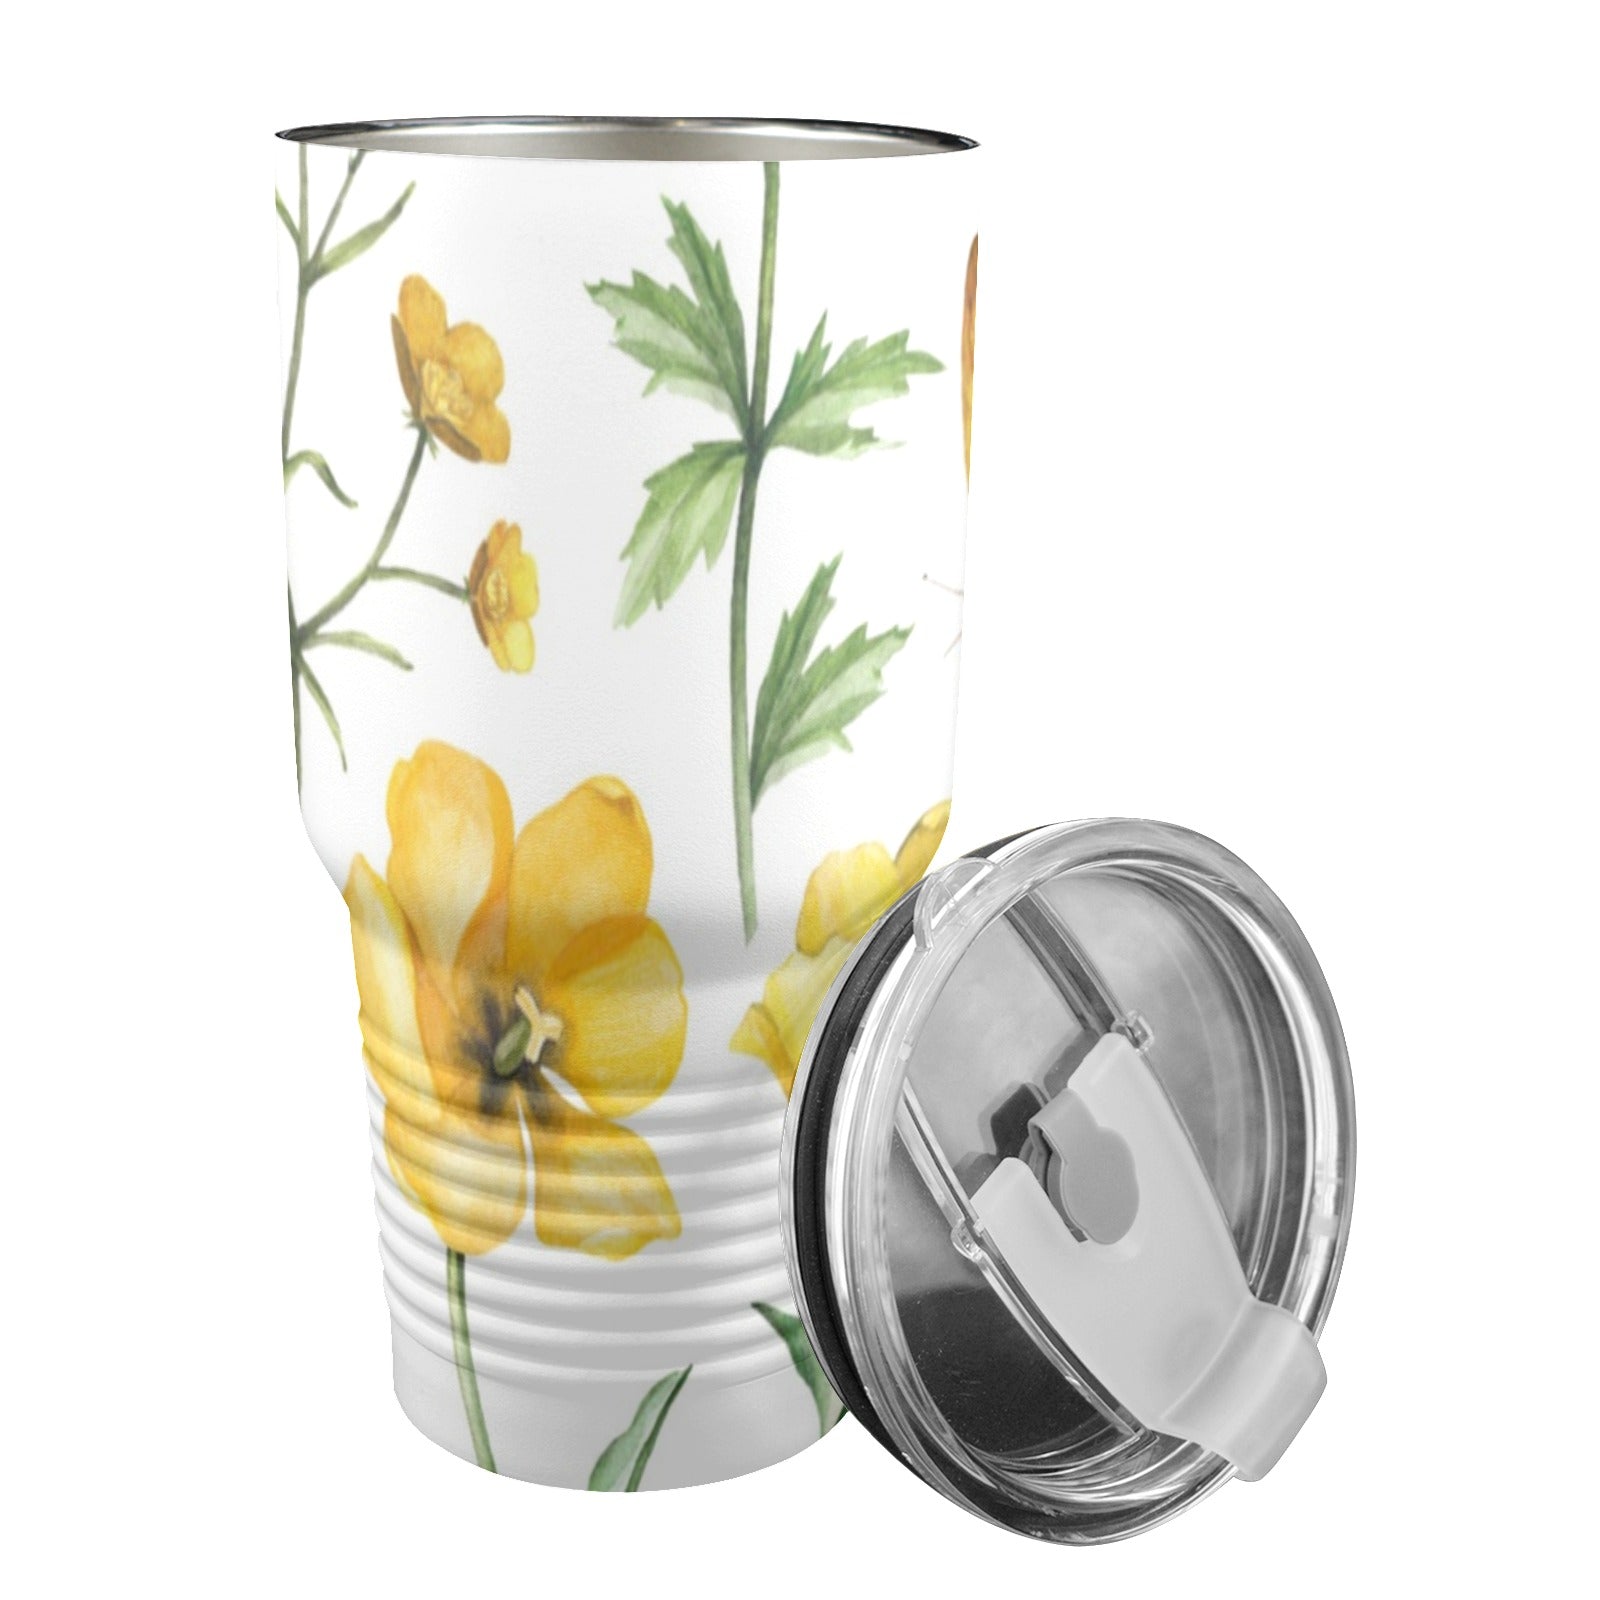 Yellow Flowers - 30oz Insulated Stainless Steel Mobile Tumbler 30oz Insulated Stainless Steel Mobile Tumbler Plants